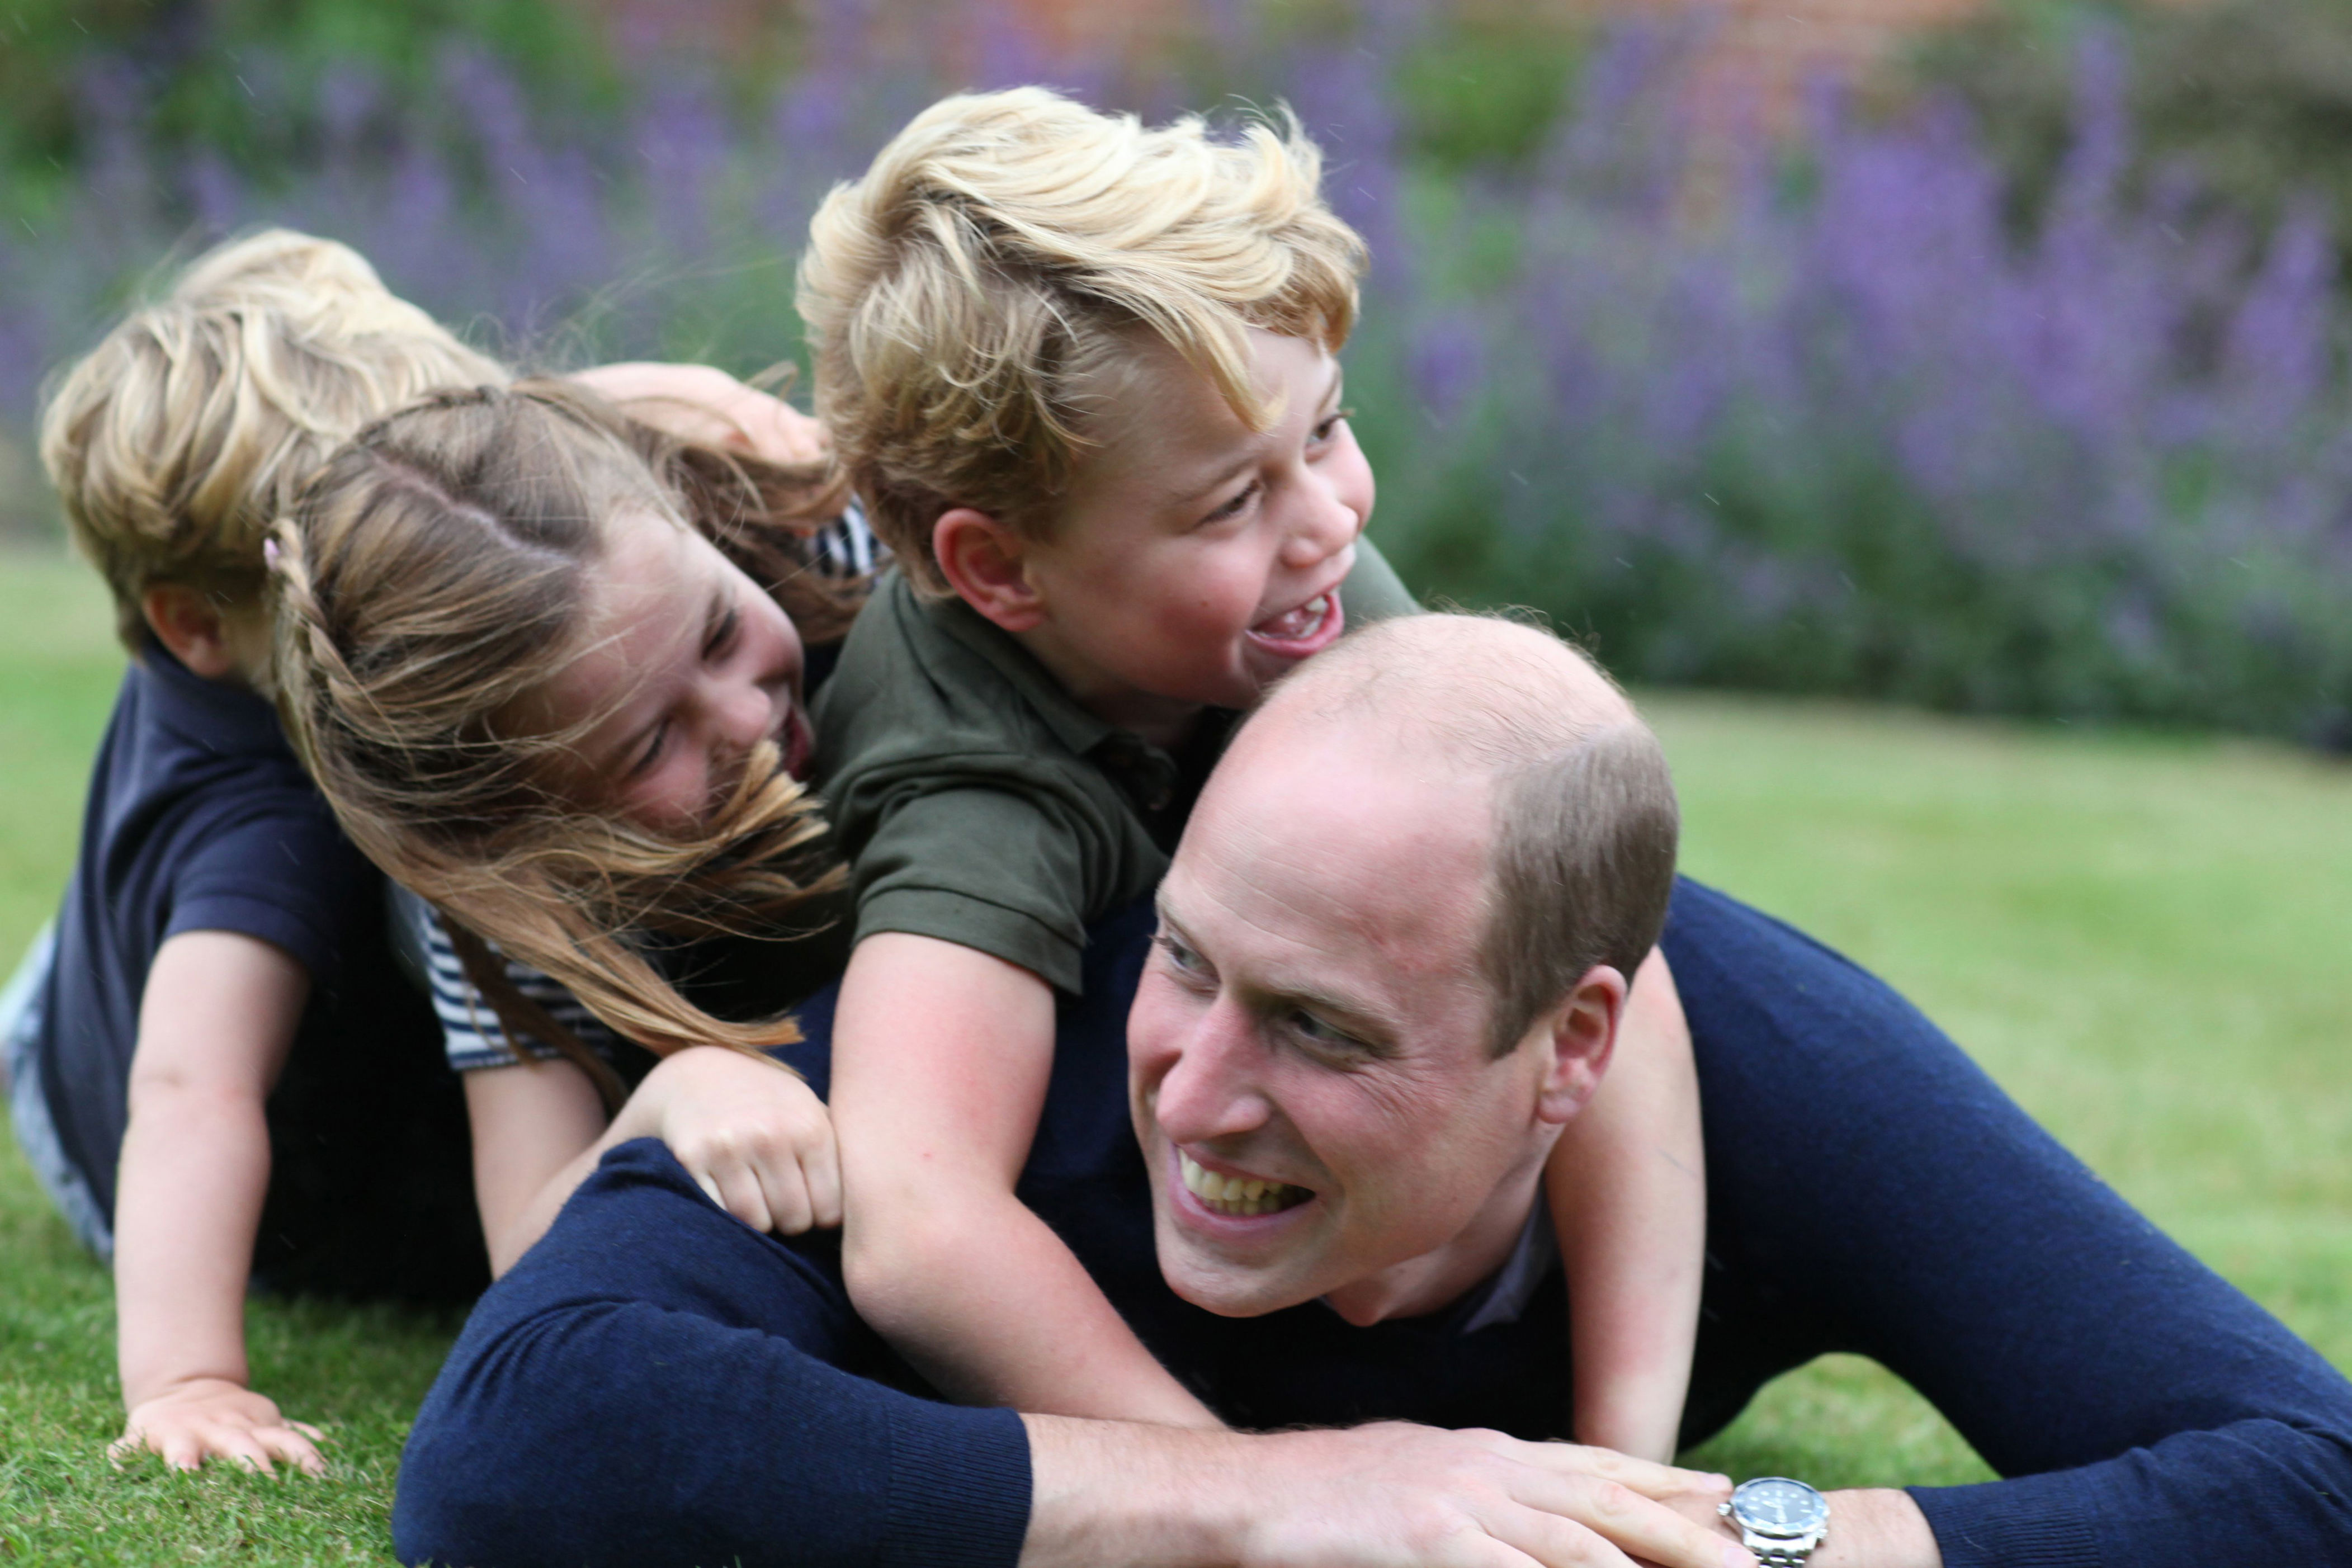 <p>This playful snapshot of the adorable trio horsing around with dad <a href="https://www.wonderwall.com/celebrity/profiles/overview/prince-william-482.article">Prince William</a> in Norfolk, England, in June 2020 was snapped by <a href="https://www.wonderwall.com/celebrity/profiles/overview/duchess-kate-1356.article">Duchess Kate</a> and shared by Kensington Palace in honor of the Duke of Cambridge's 38th birthday on June 21 -- which happened to fall on Father's Day. </p>